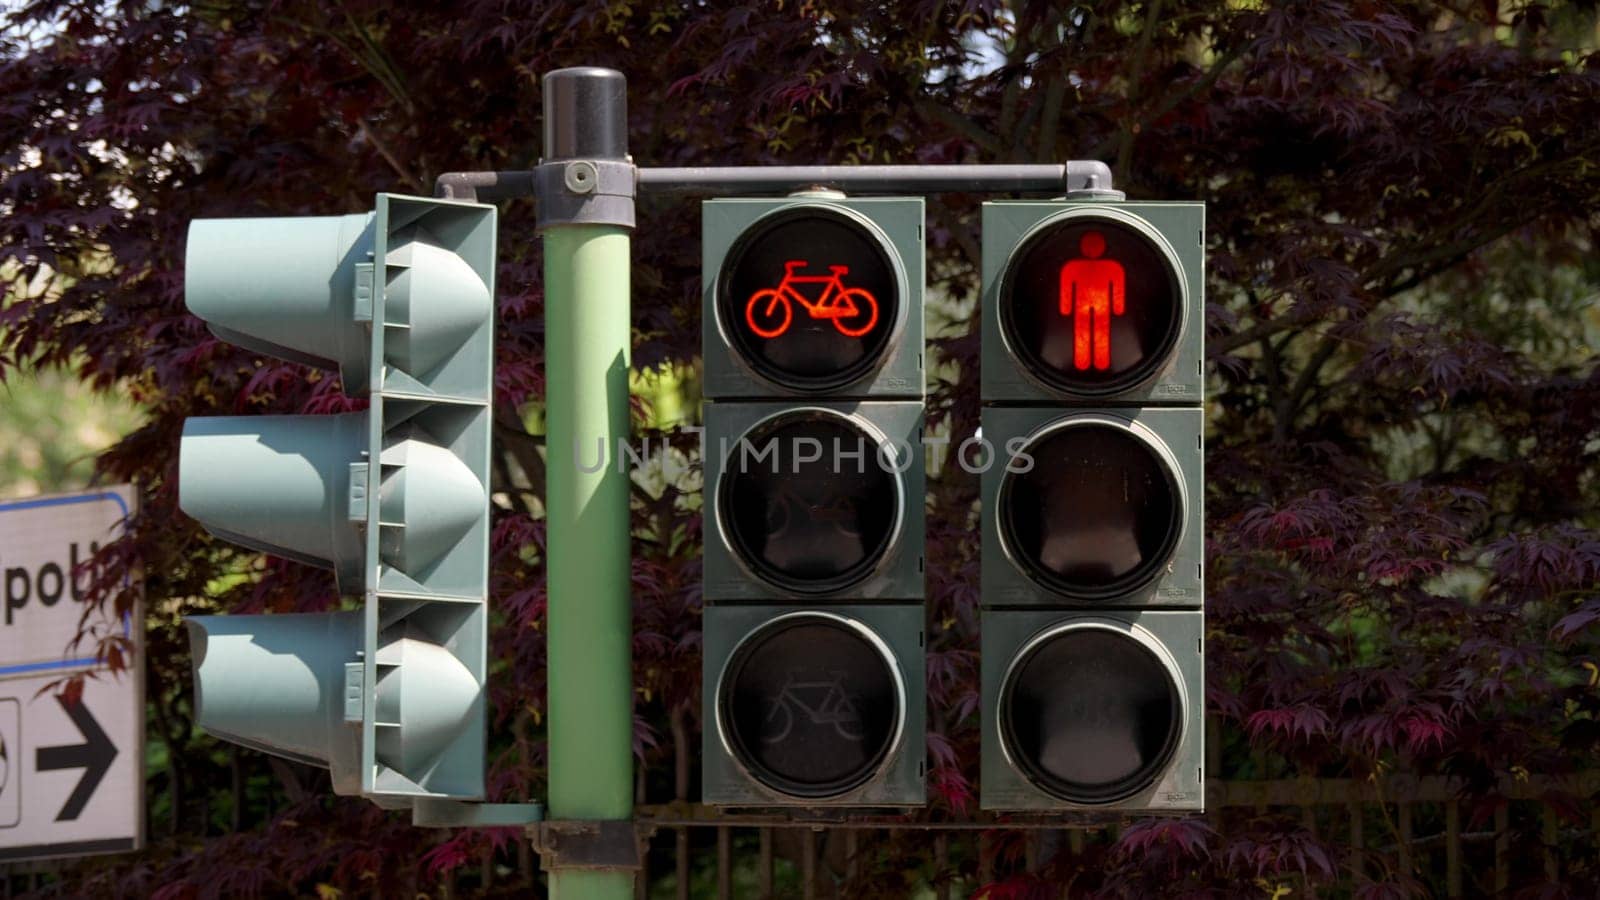 Showcasing a dual traffic light system designed for both cyclists and pedestrians, set against a backdrop of lush greenery. this image highlights urban planning and safety features in a modern city environment